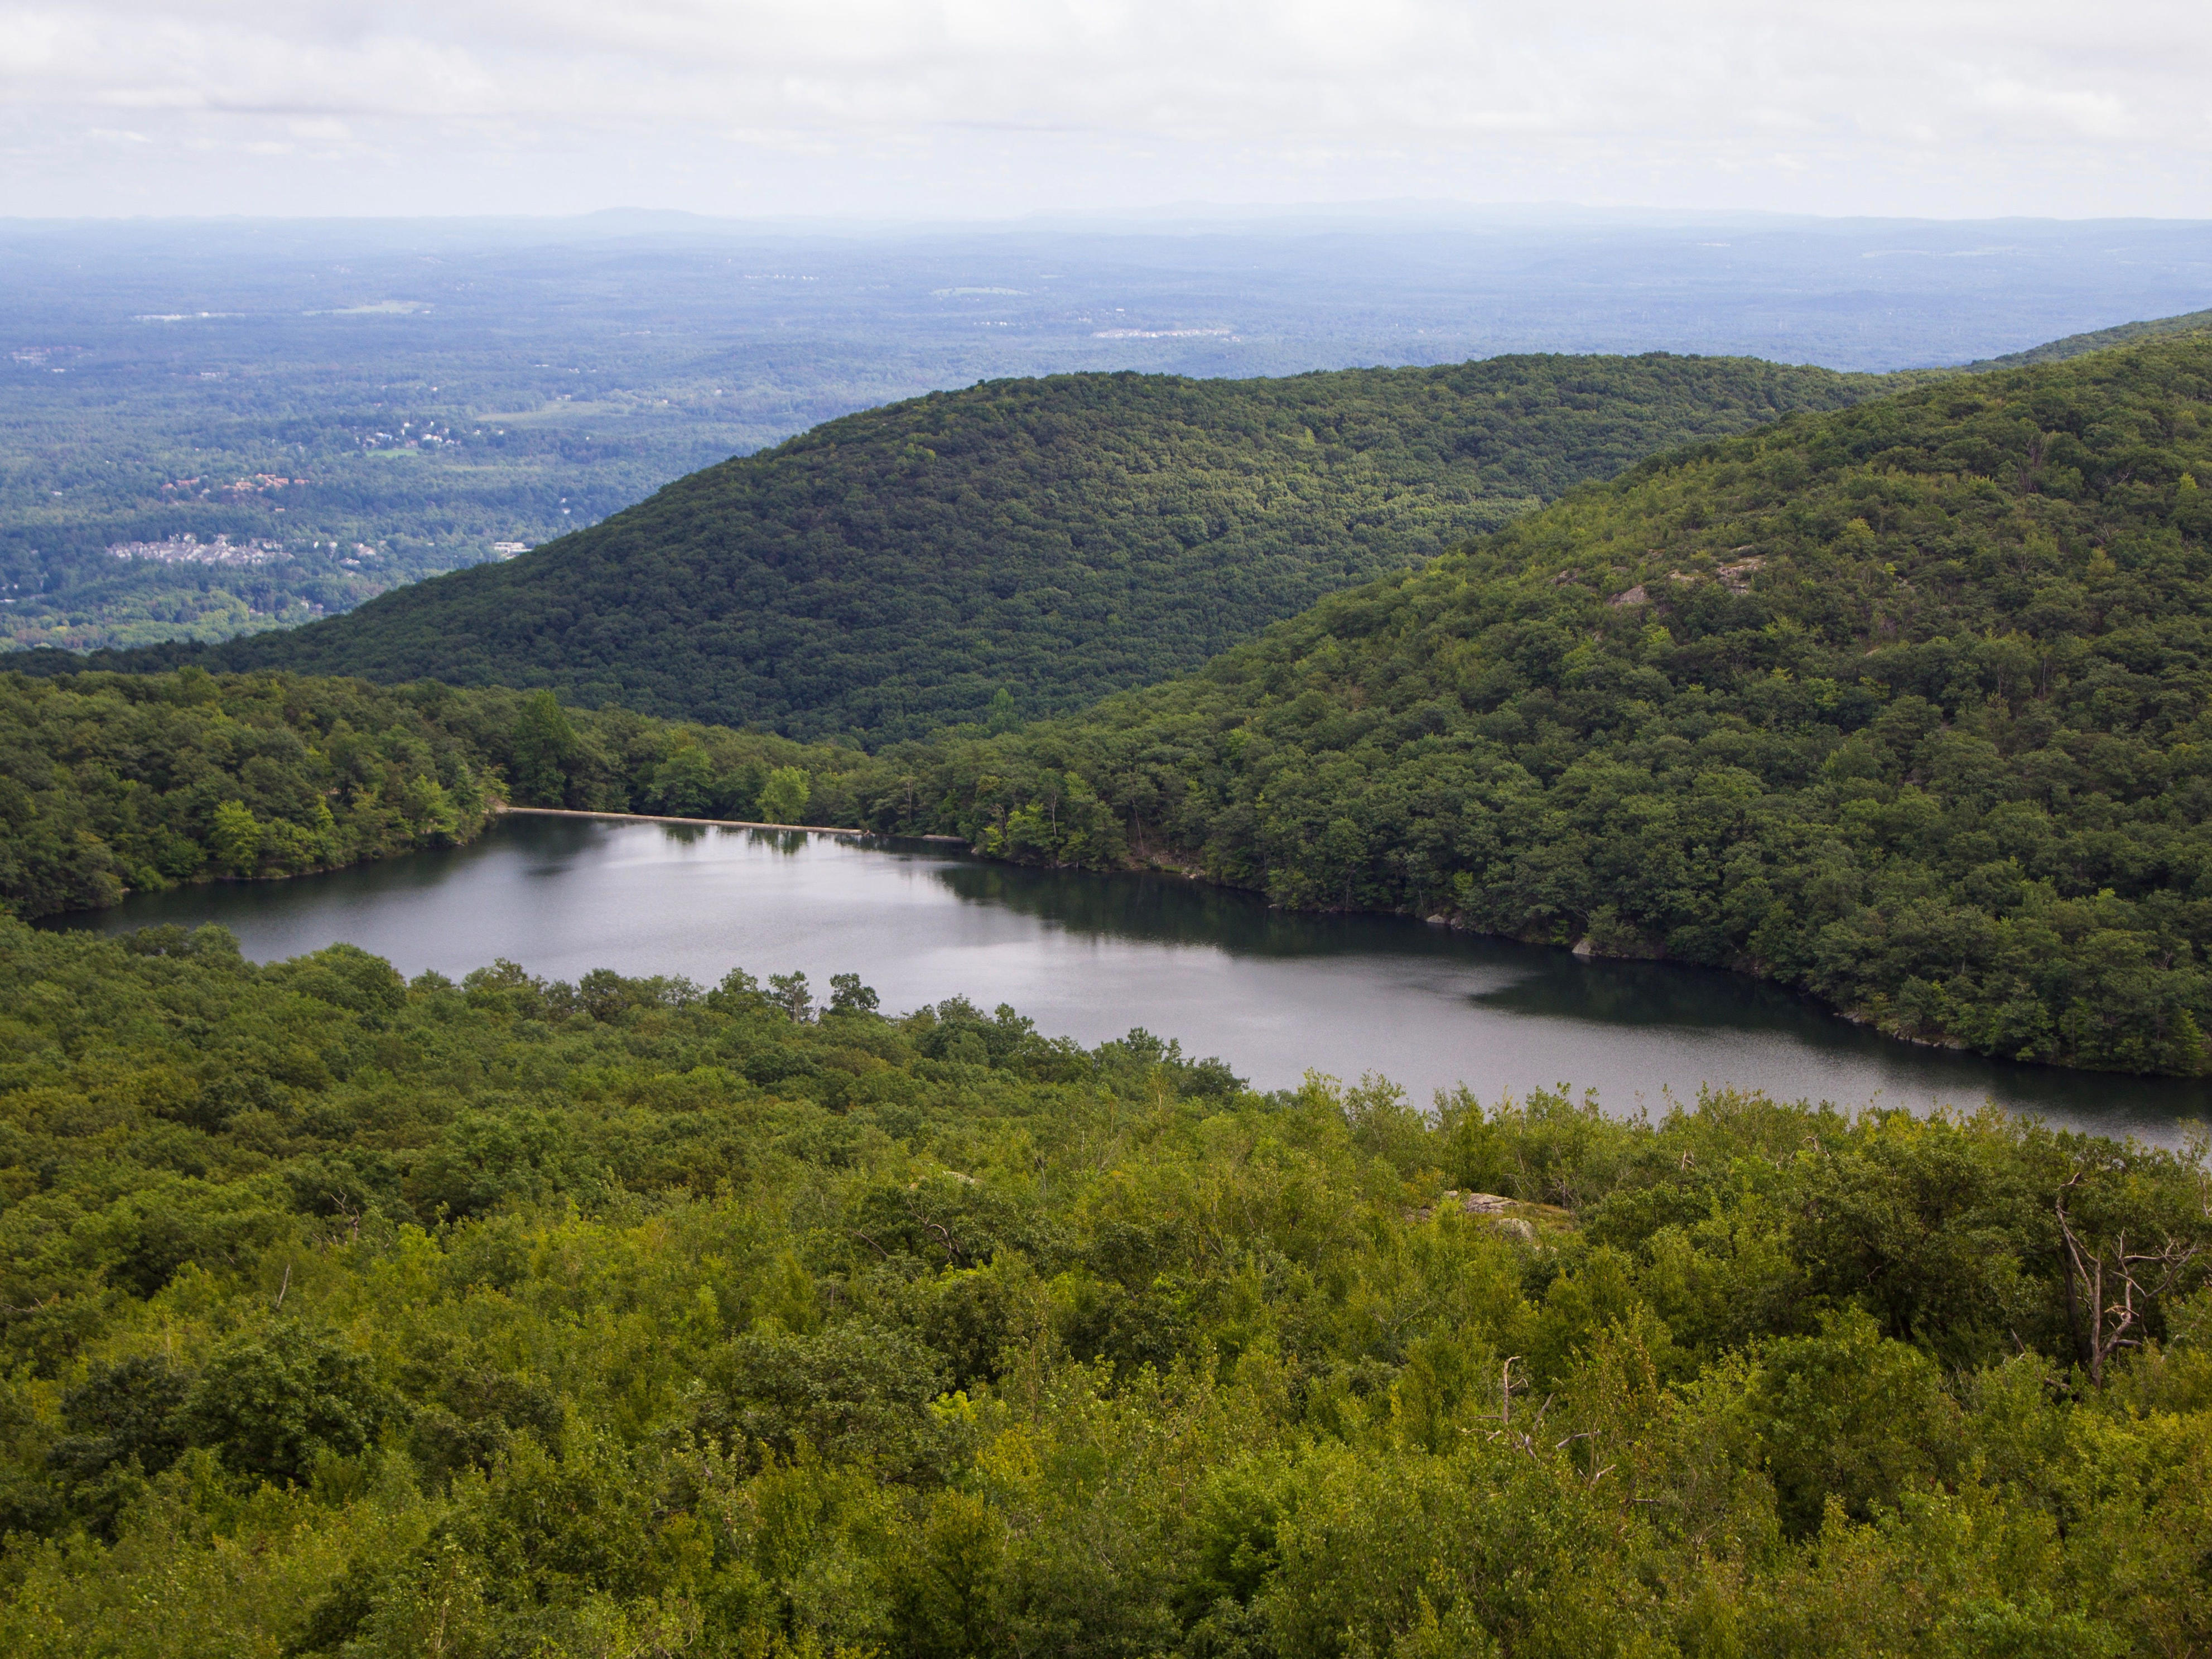 <p>There are numerous lookout points as you climb <a href="https://www.scenichudson.org/explore-the-valley/scenic-hudson-parks/mount-beacon-park/">Mount Beacon</a>, so there are options on how long the hike goes. If the 200 stairs and steep switchbacks don't tire you out too much, once you've passed a clifftop you can venture even further to a rebuilt fire tower.</p><p>Once you reach the top, you'll be rewarded with a panoramic view stretching from the Hudson Highlands to the Catskill Mountains.</p>